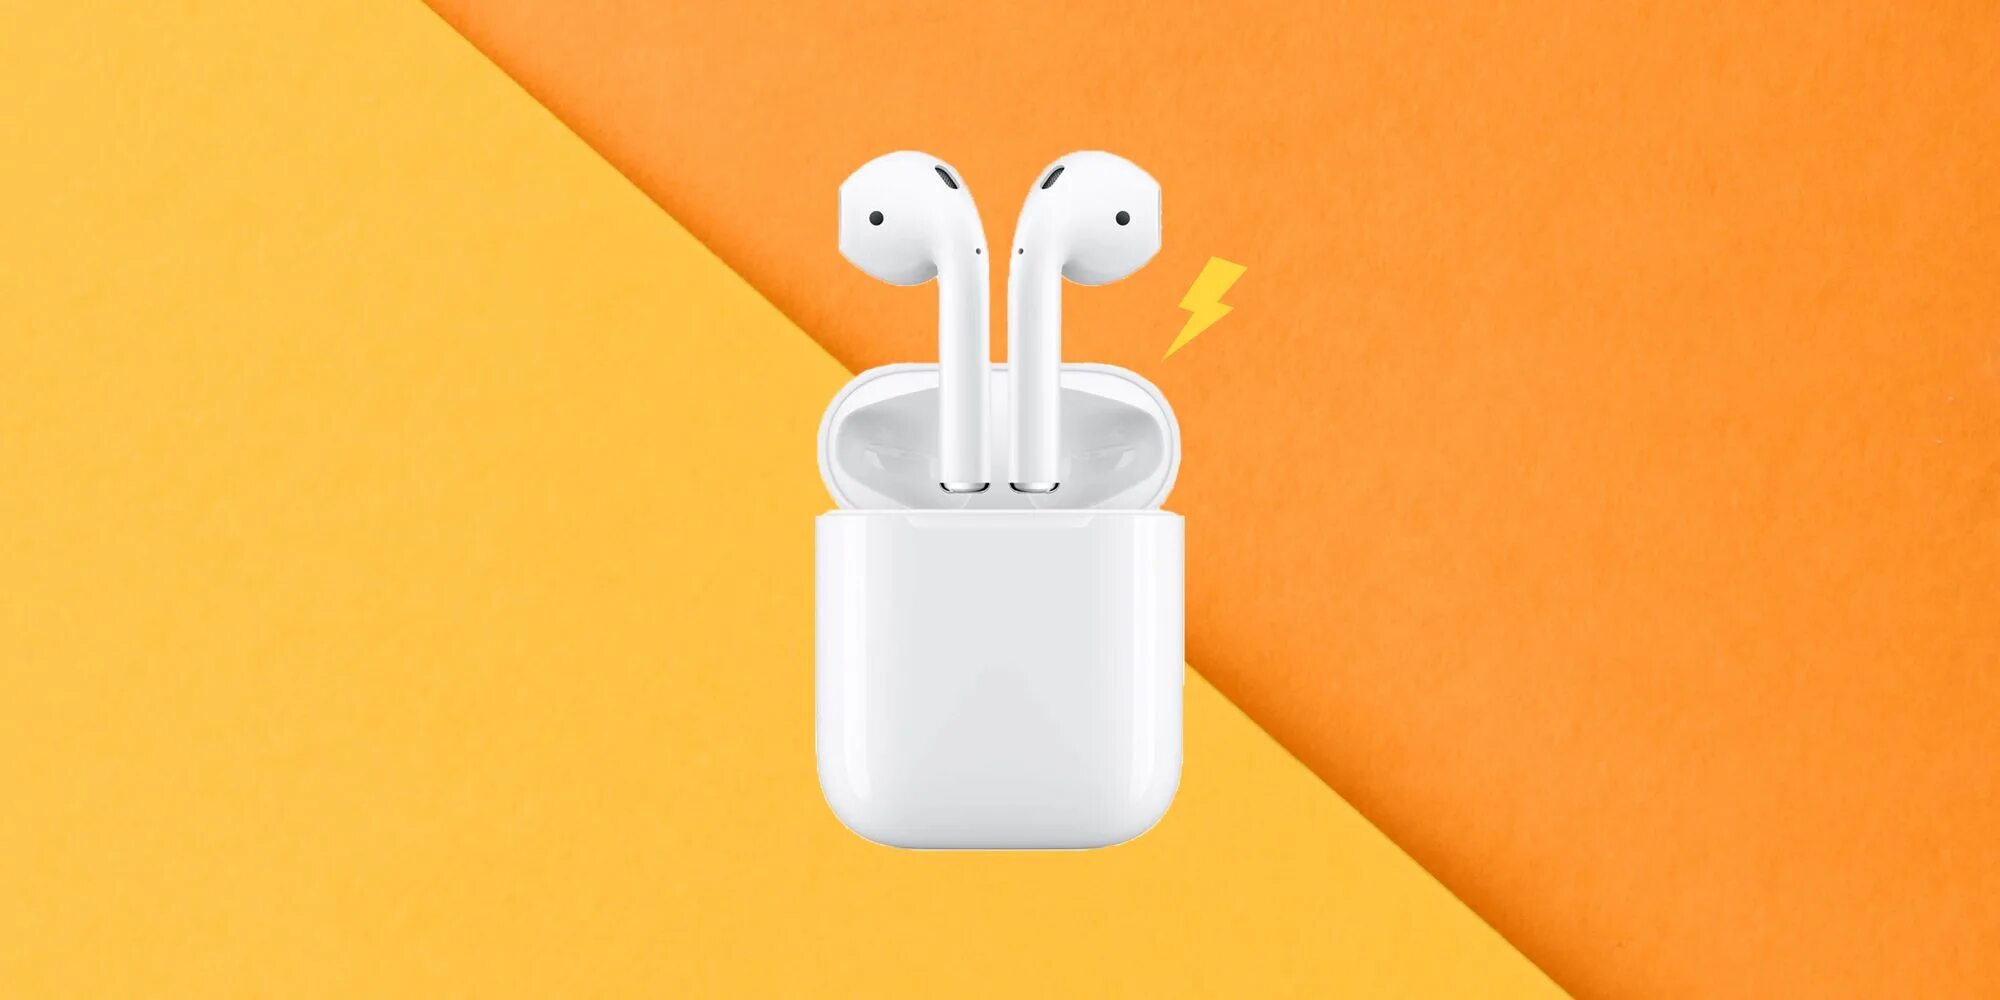 Air pods 2. Наушники AIRPODS 3. AIRPODS 2.2 Post. AIRPODS 3 на белом фоне.